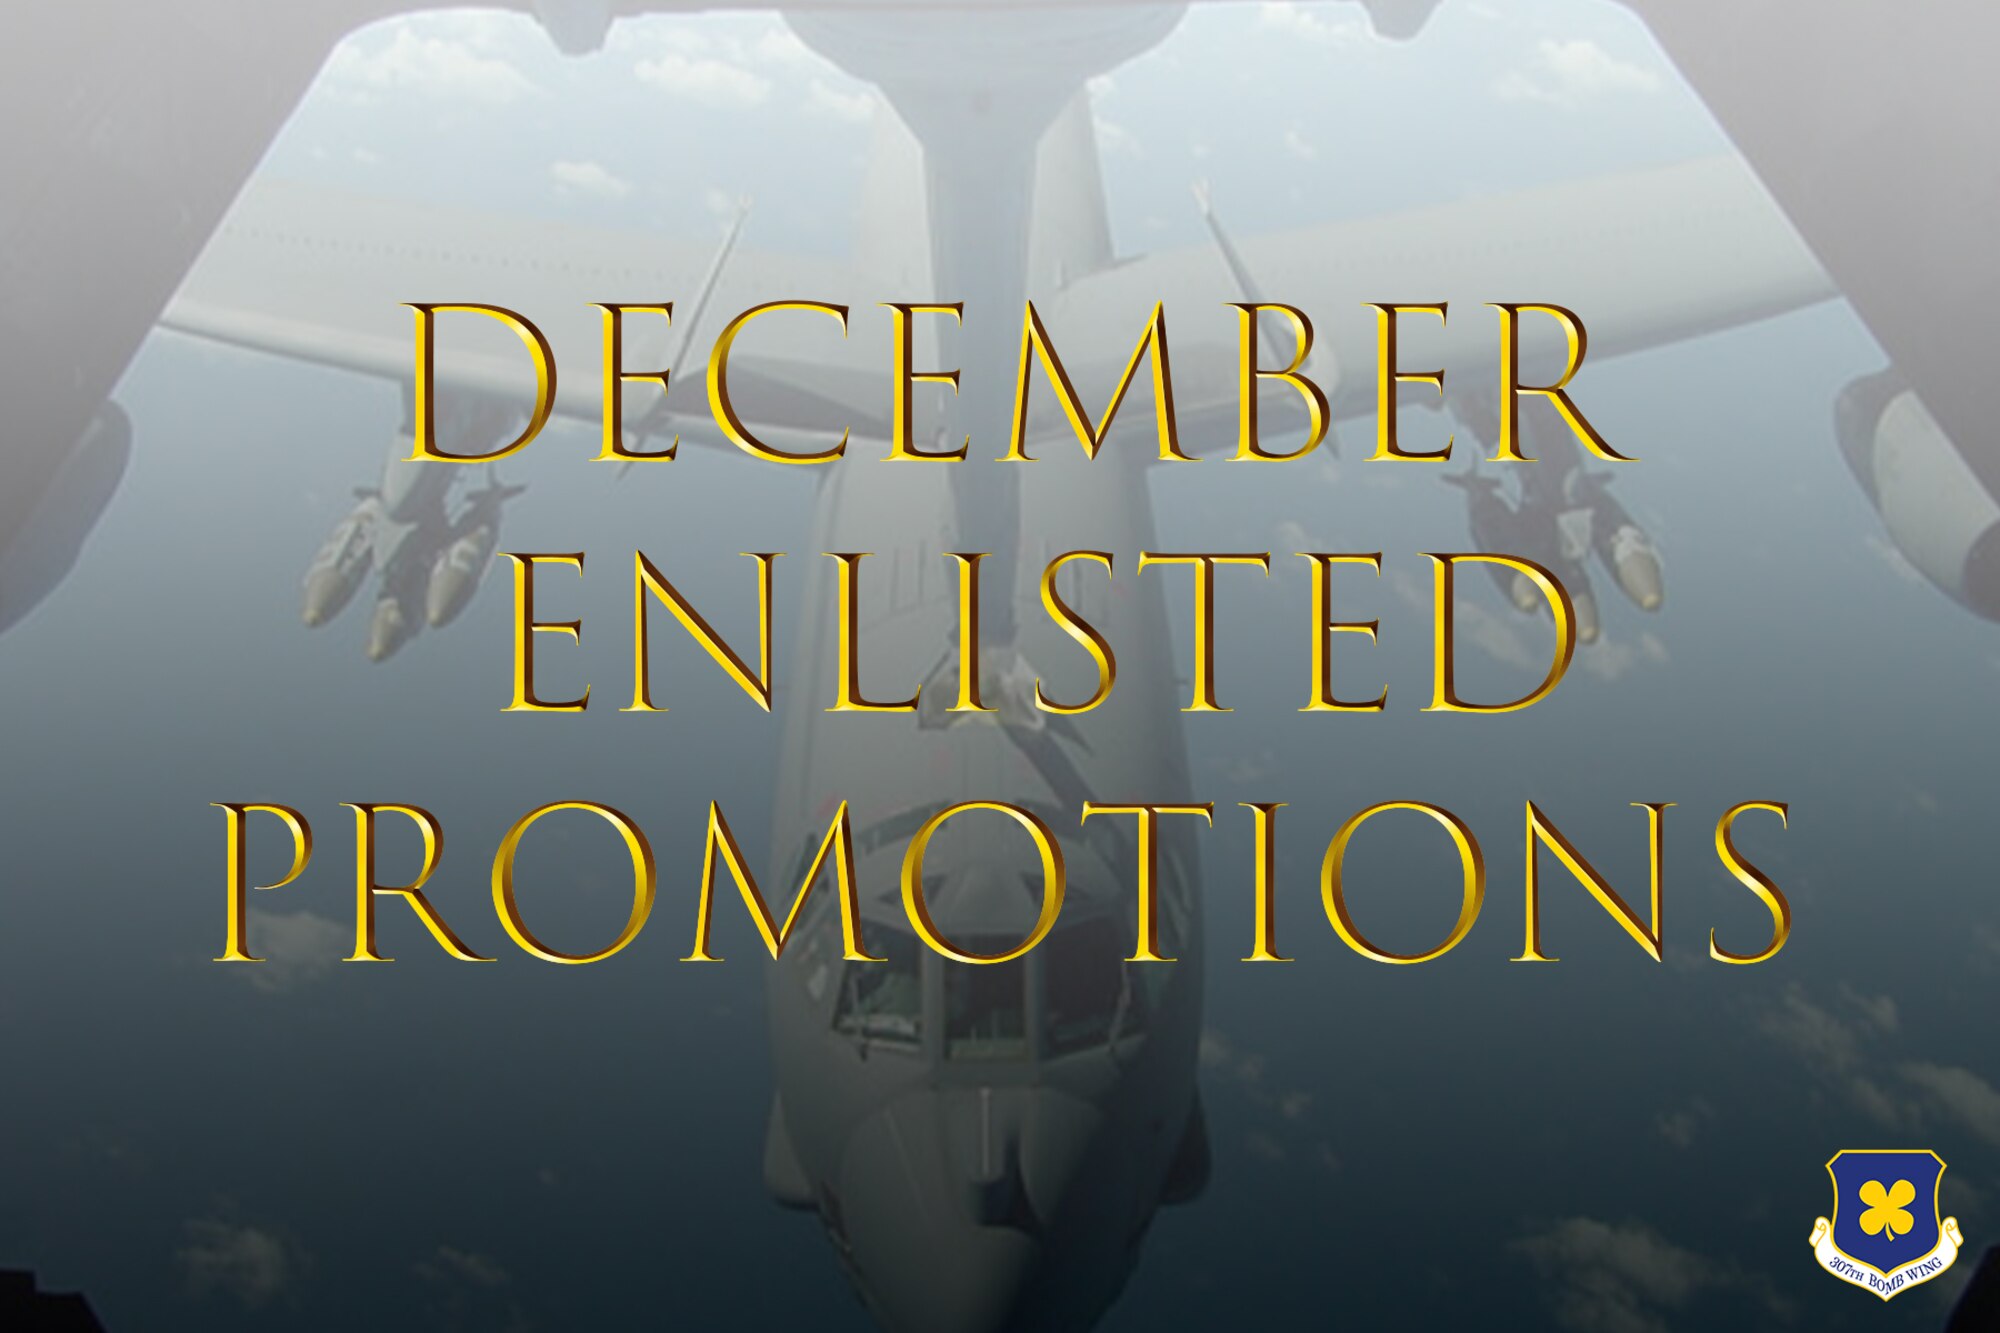 Photo of B-52 with words December Enlisted Promotions in gold